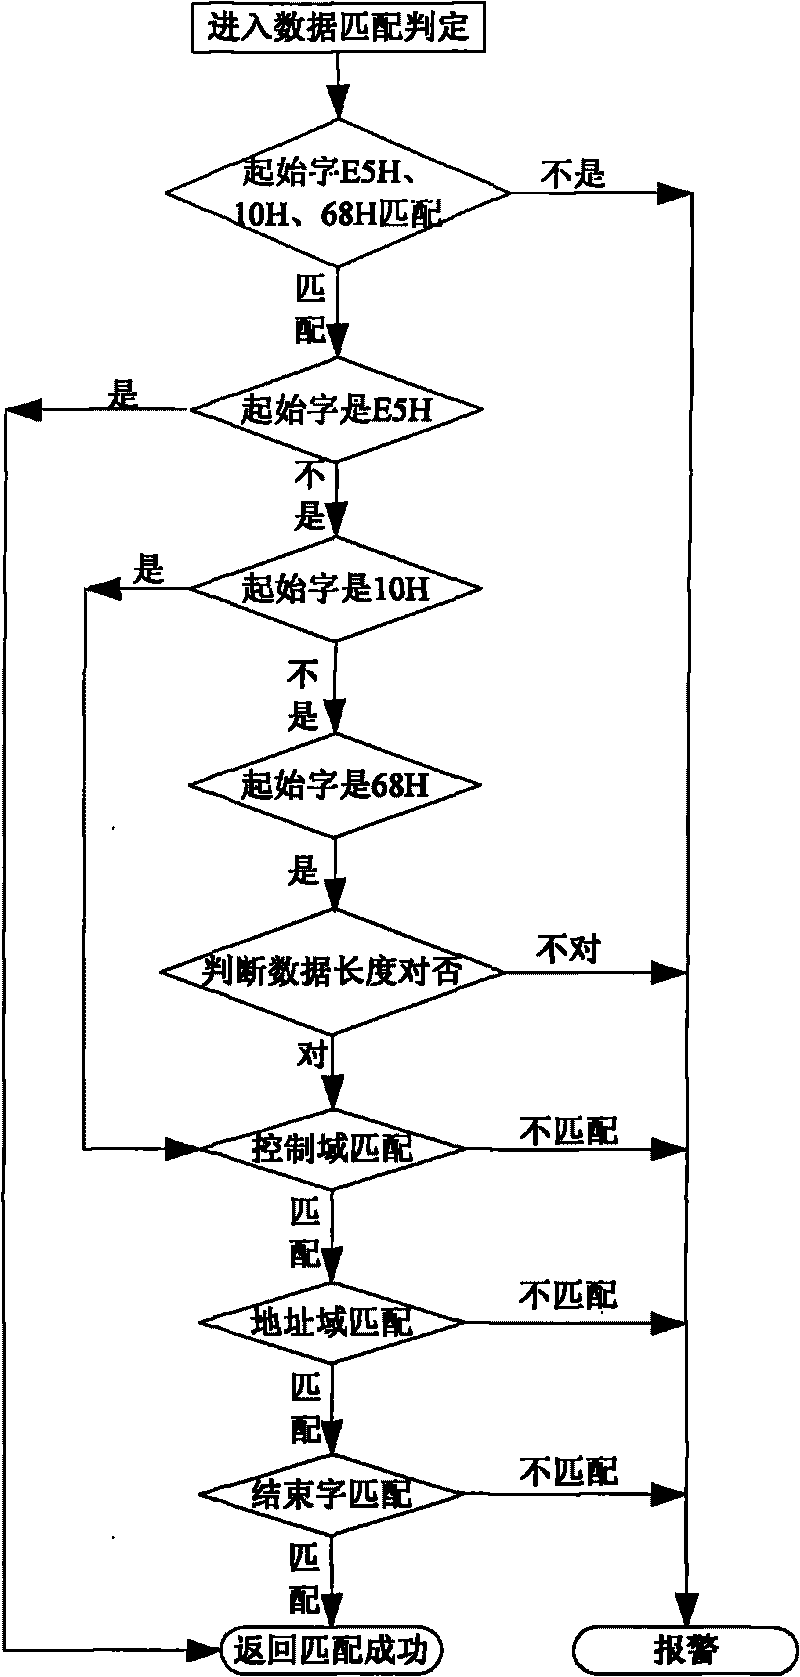 Power station automation system data network security monitoring method